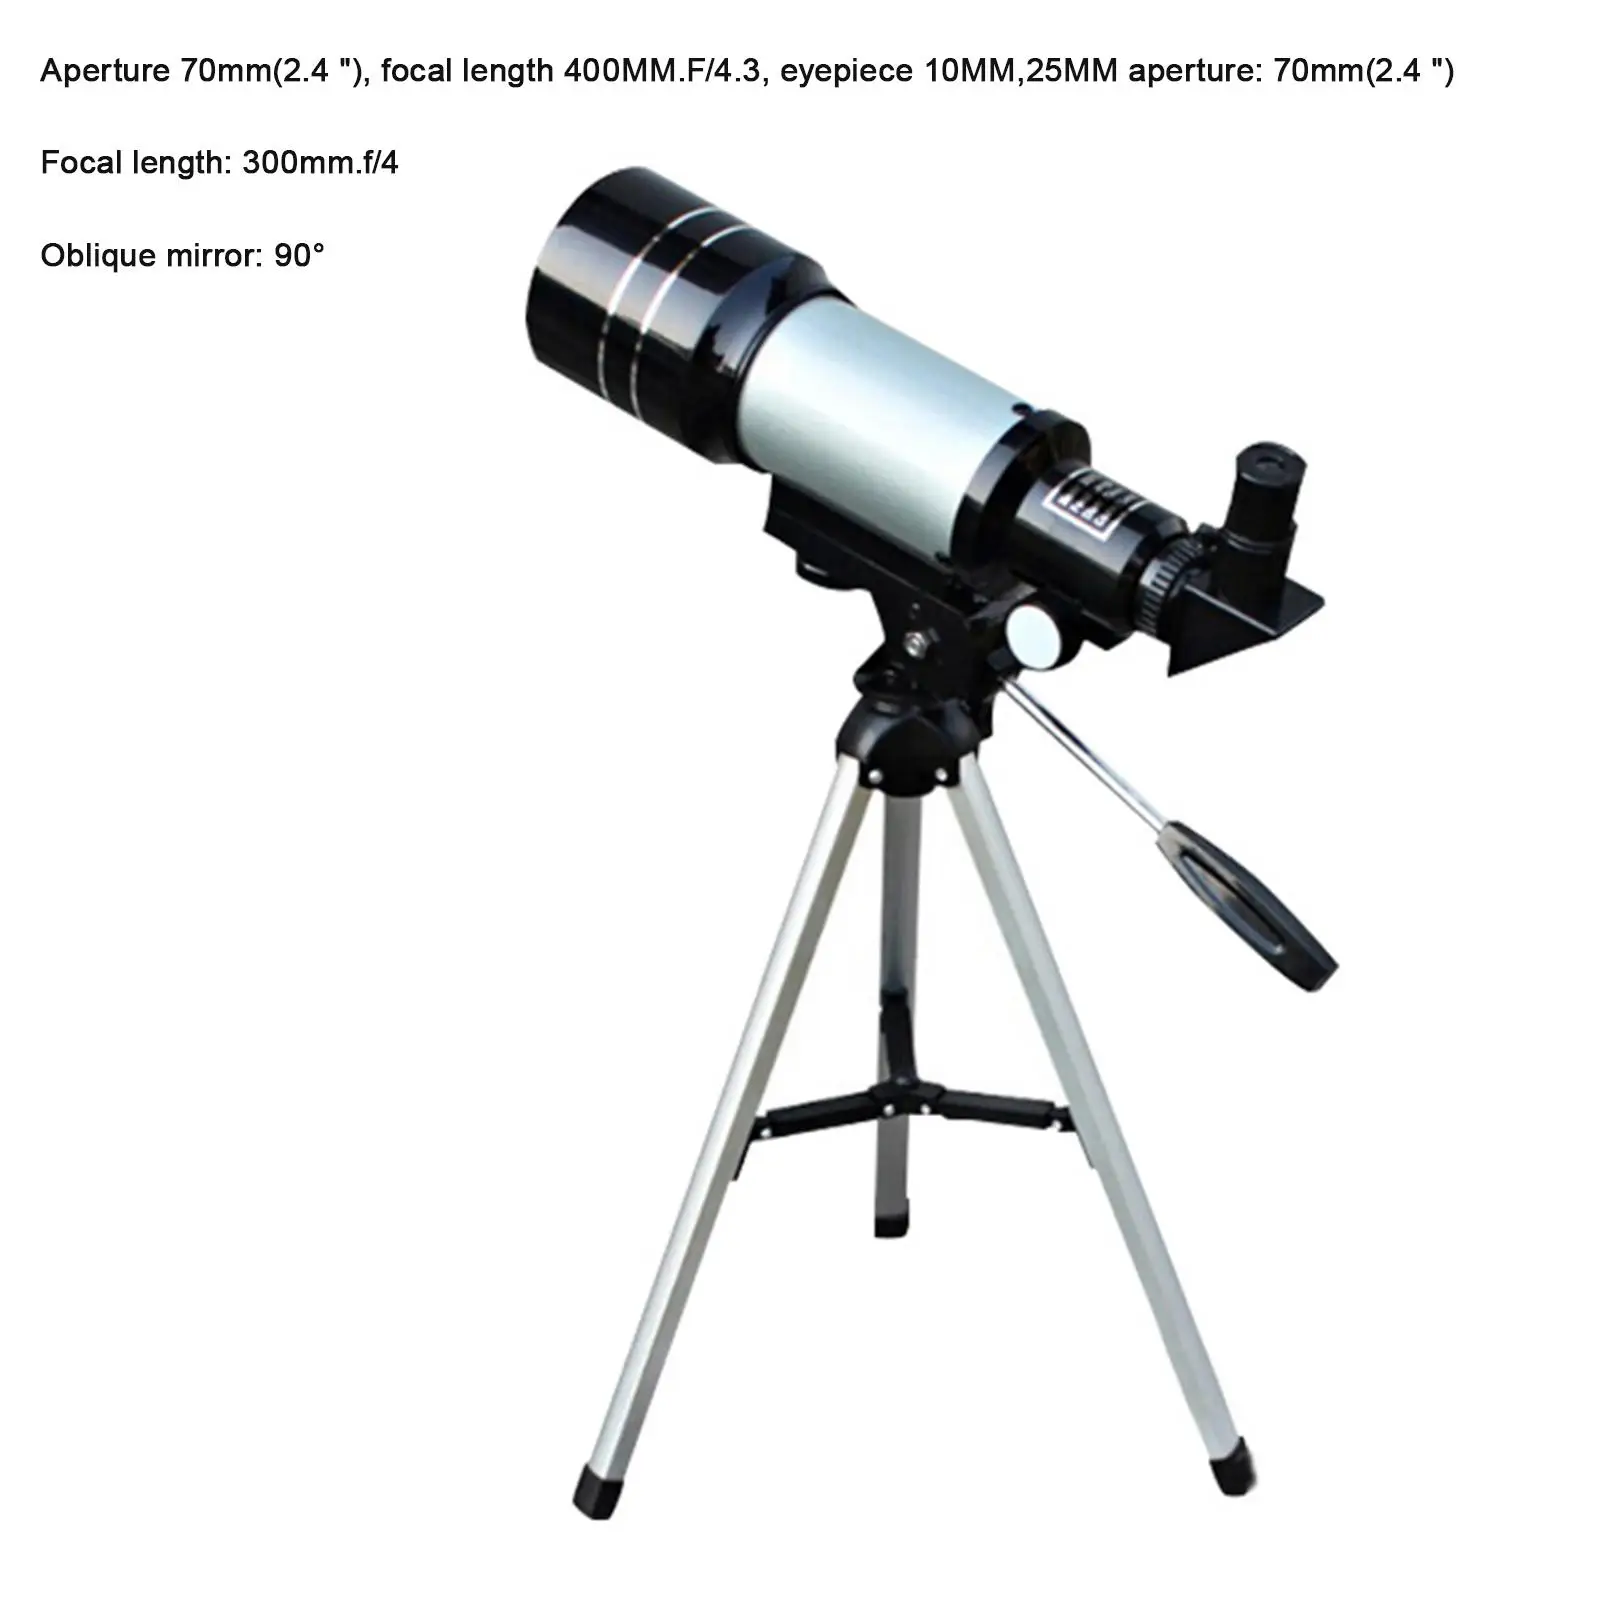 Portable 70mm 300mm Telescope with Tripod for Beginners Travel Telescope Erect Image Optics with H20mm, H6mm Eyepieces Accessory